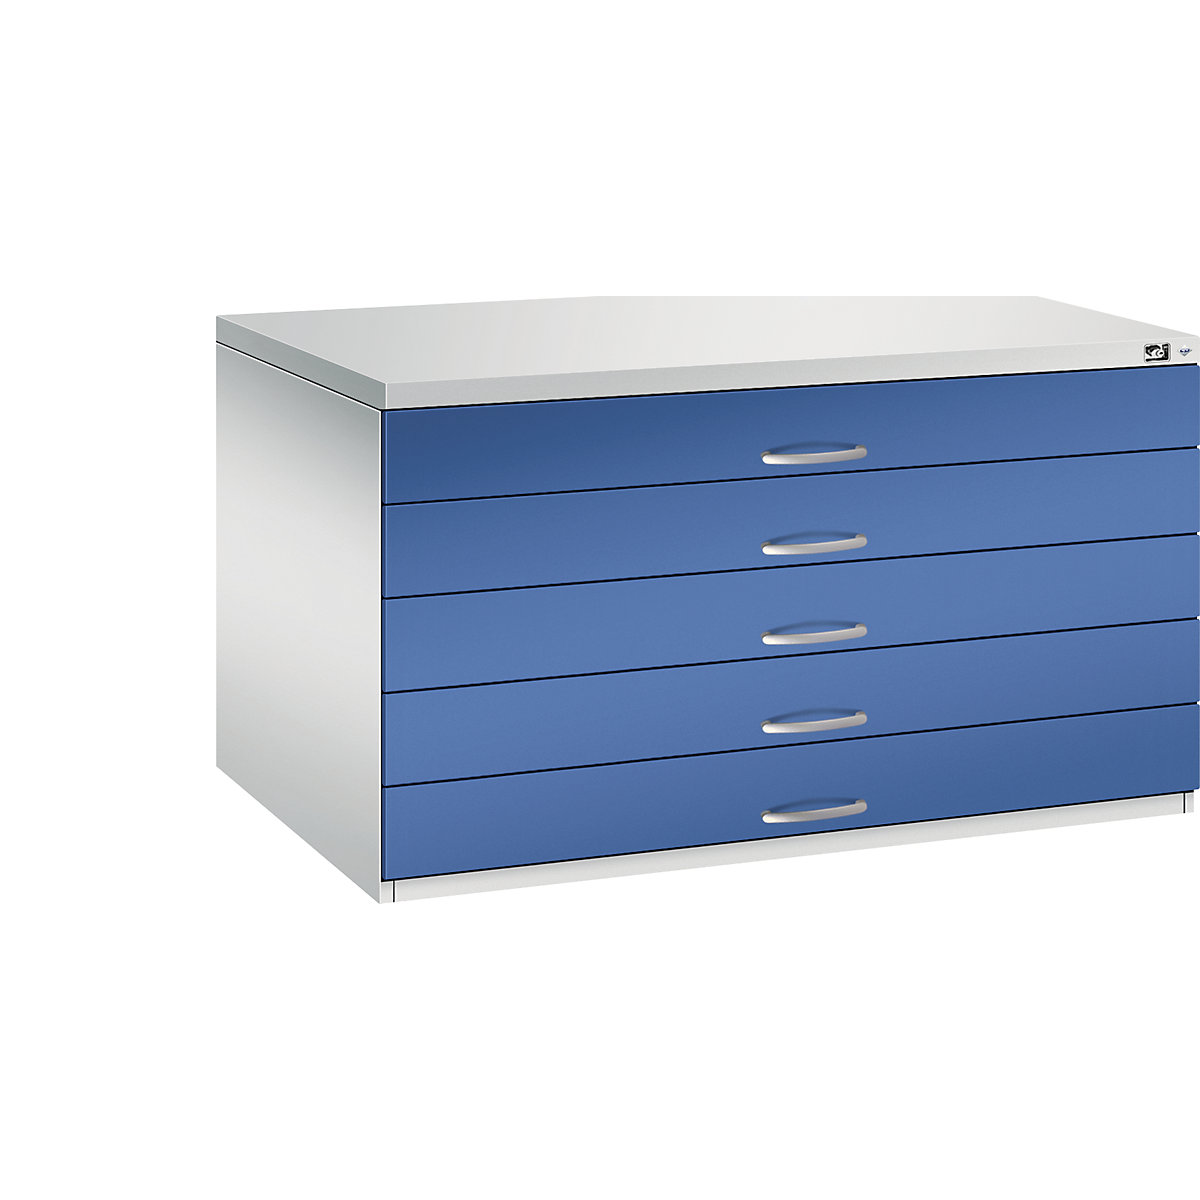 Drawing cabinet – C+P, A0, 5 drawers, height 760 mm, light grey / gentian blue-14